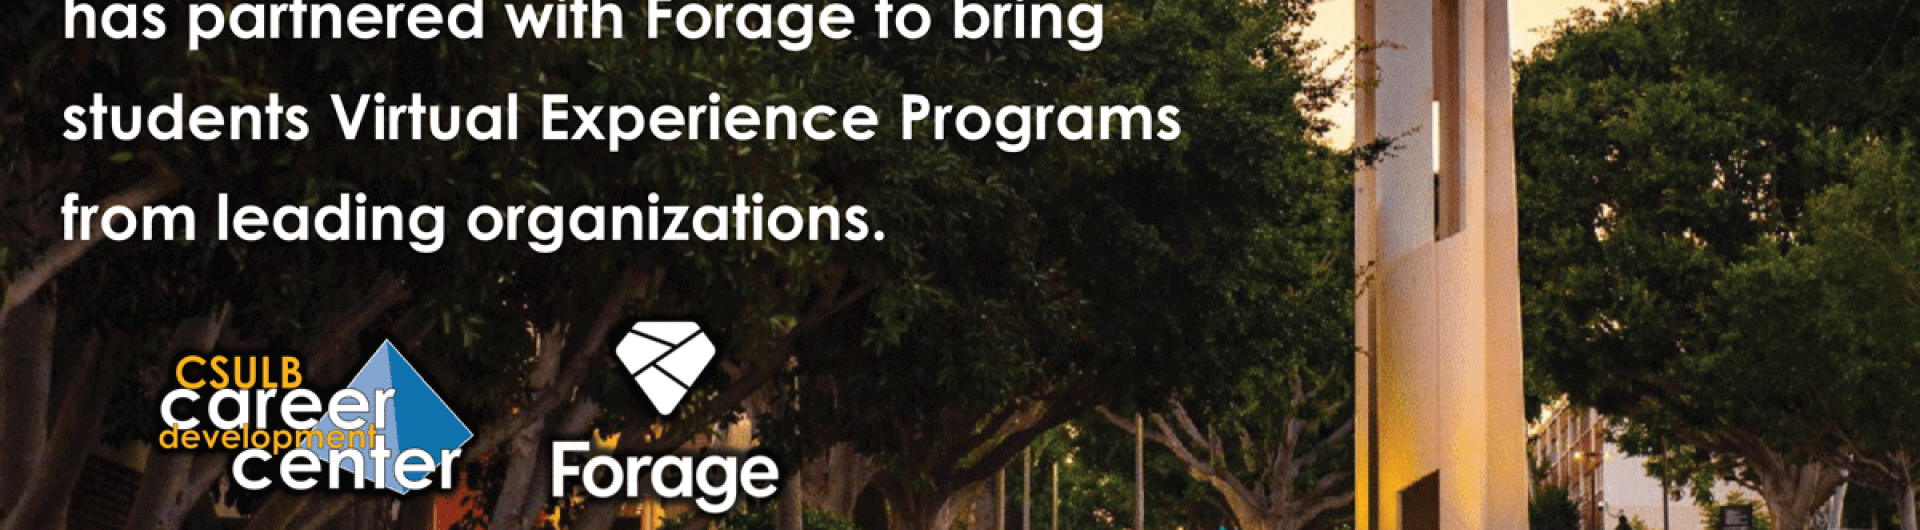 Forage: Gain skills through Virtual Experience Programs from leading organizations